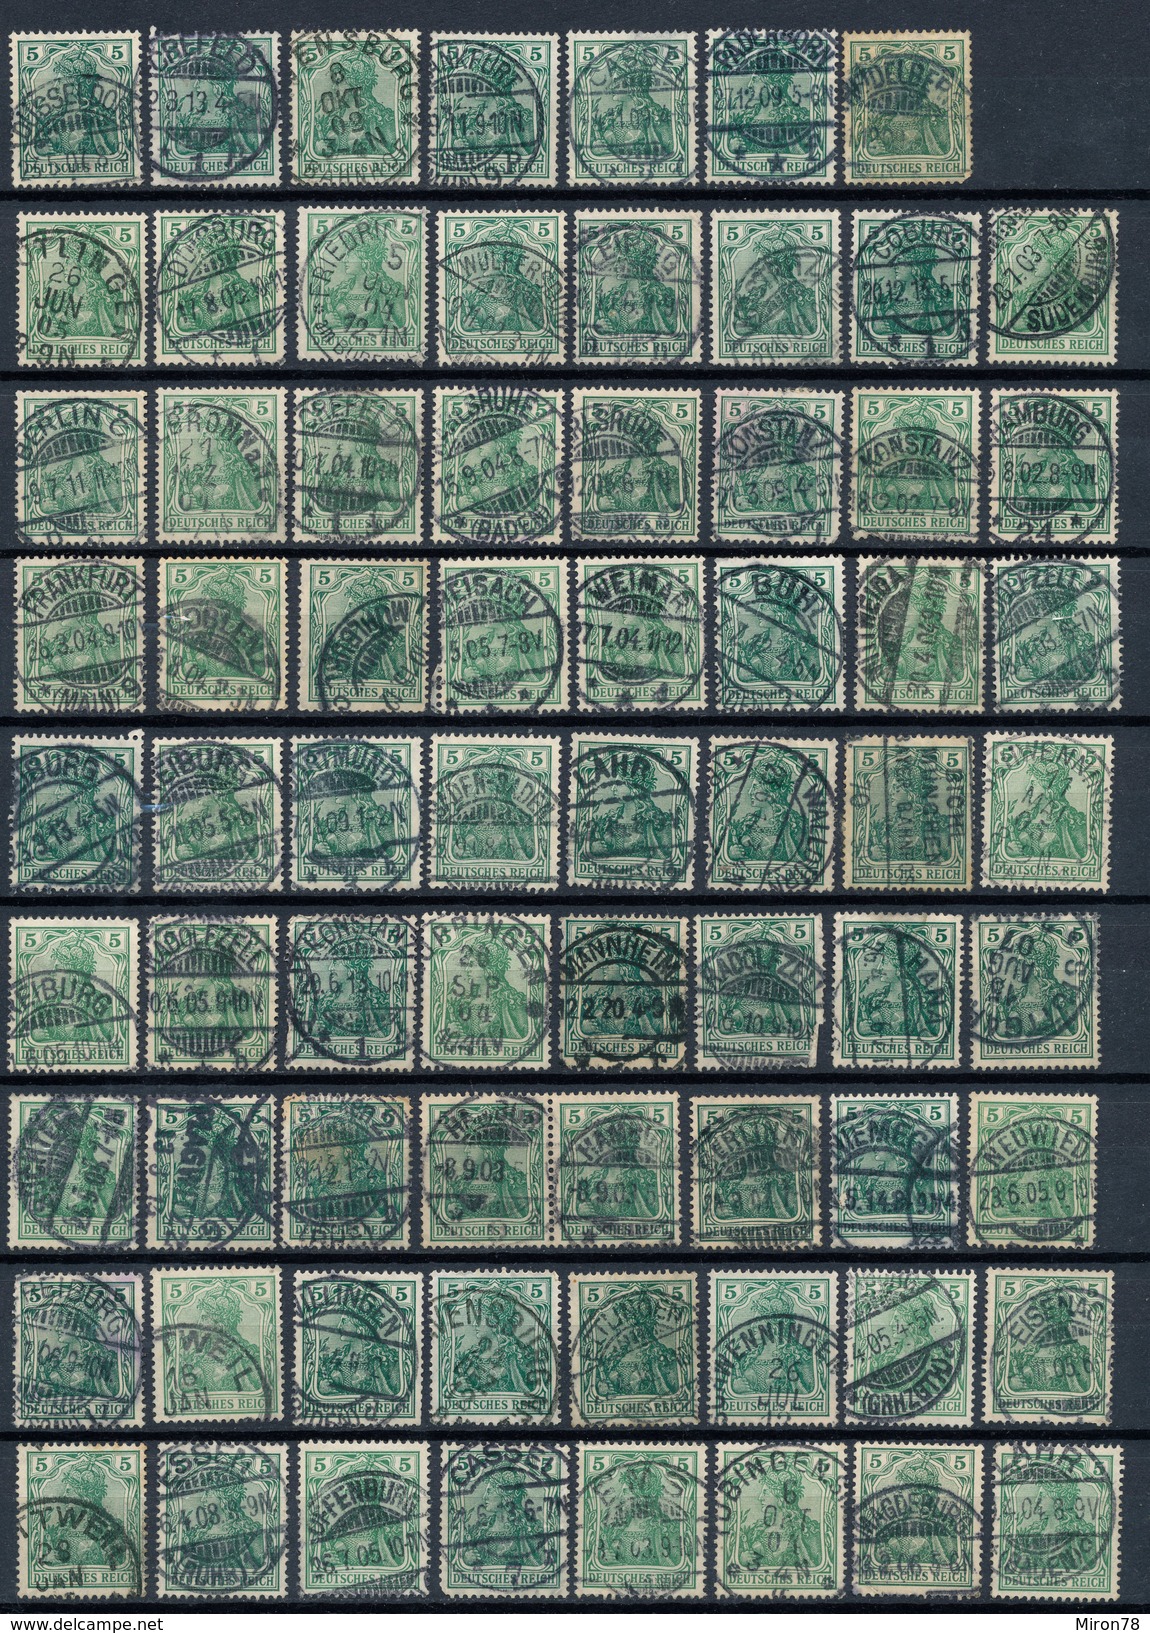 Stamps Germany 1902-1916? Fancy Cancel Used Lot#8 - Used Stamps